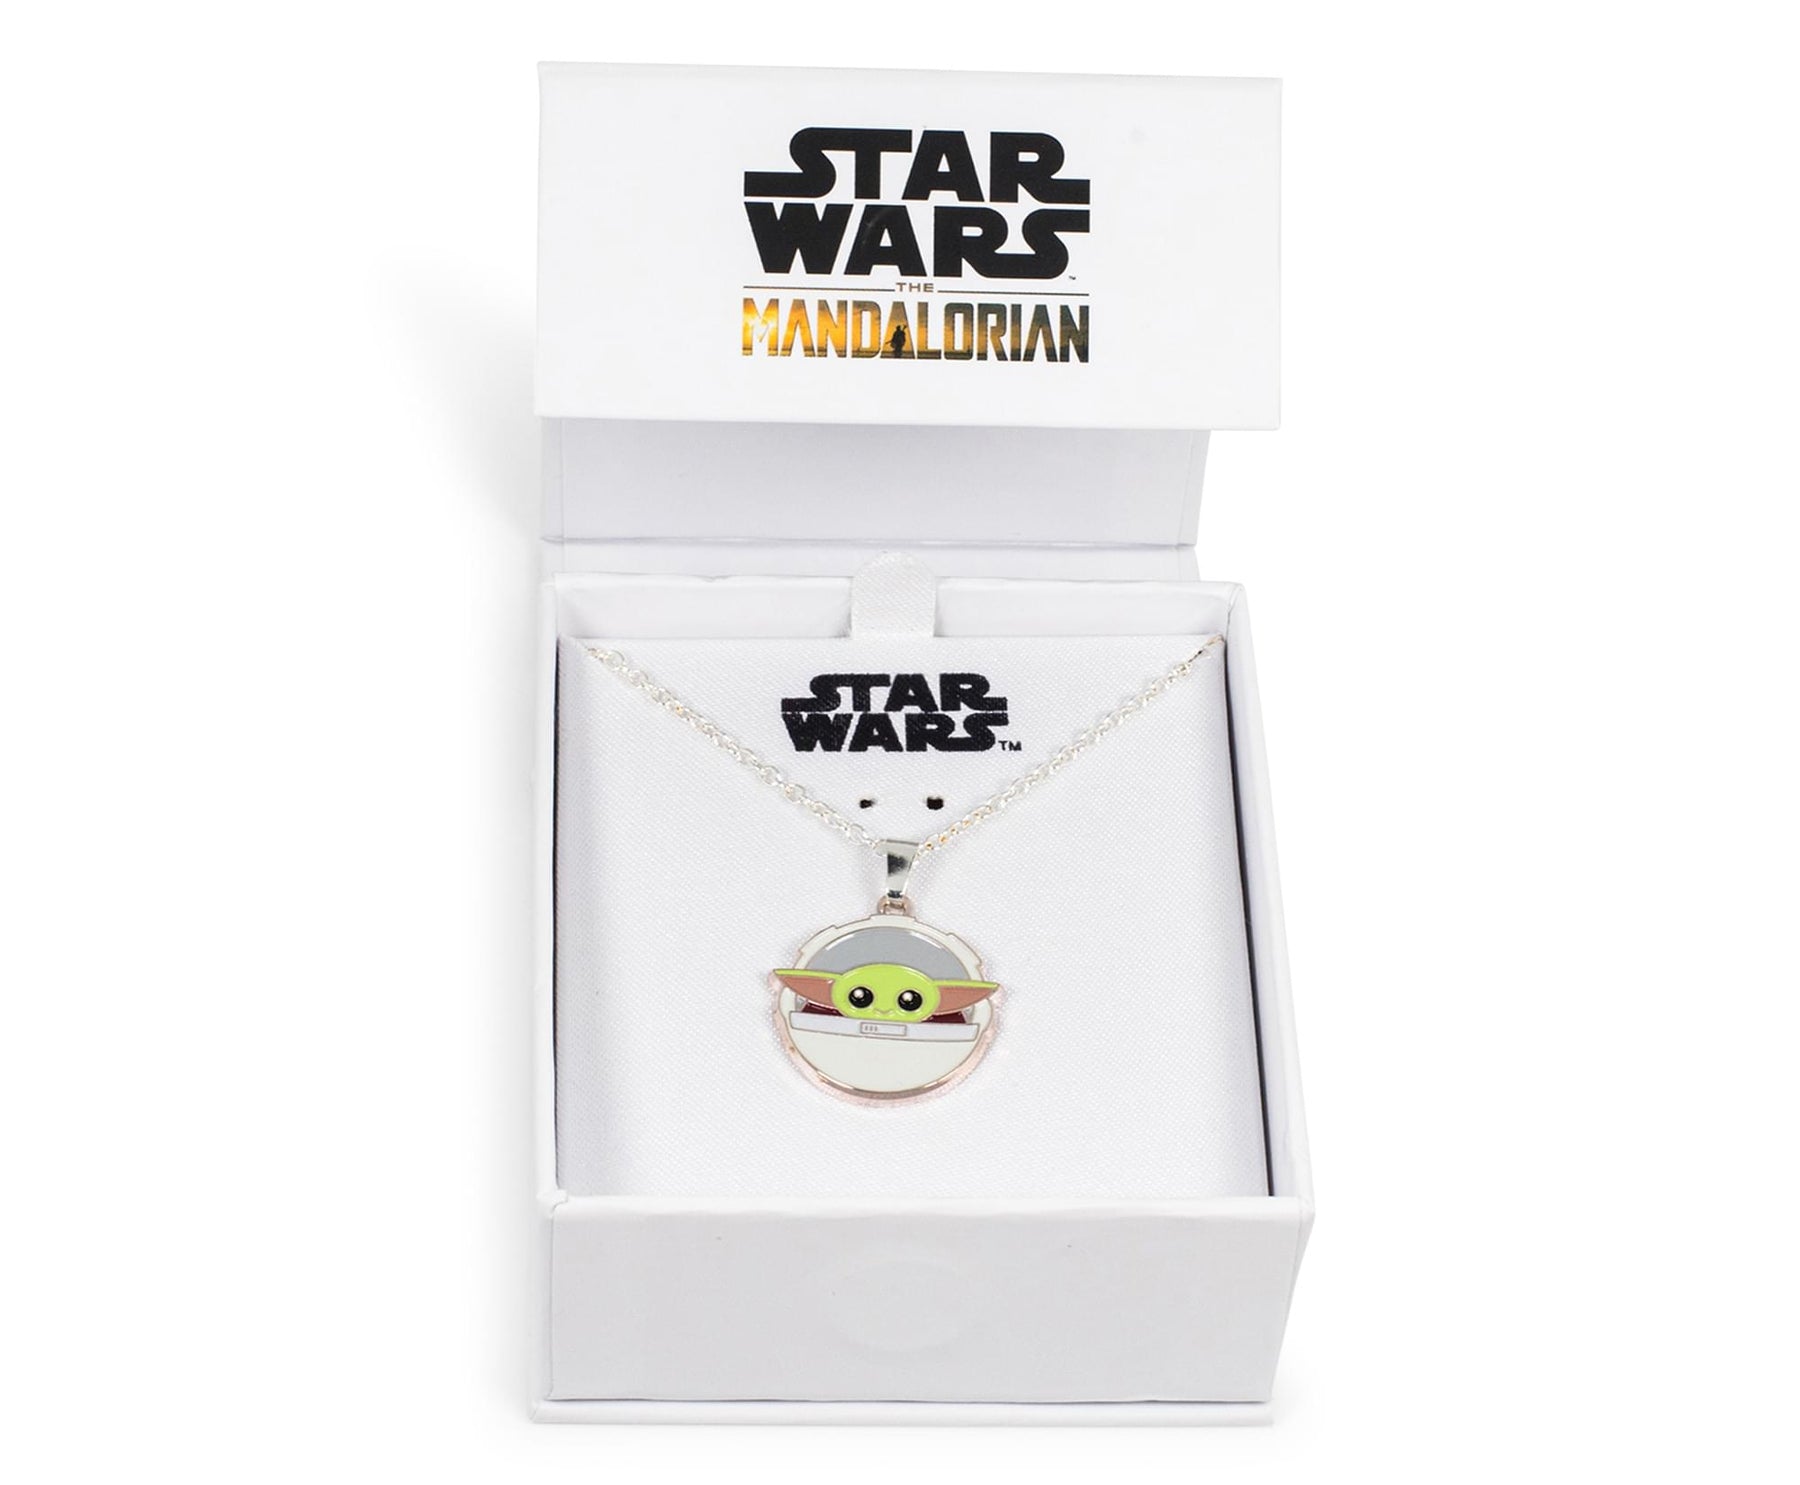 Star Wars: The Mandalorian, The Child 24-Inch Enamel Pendant Chain Necklace